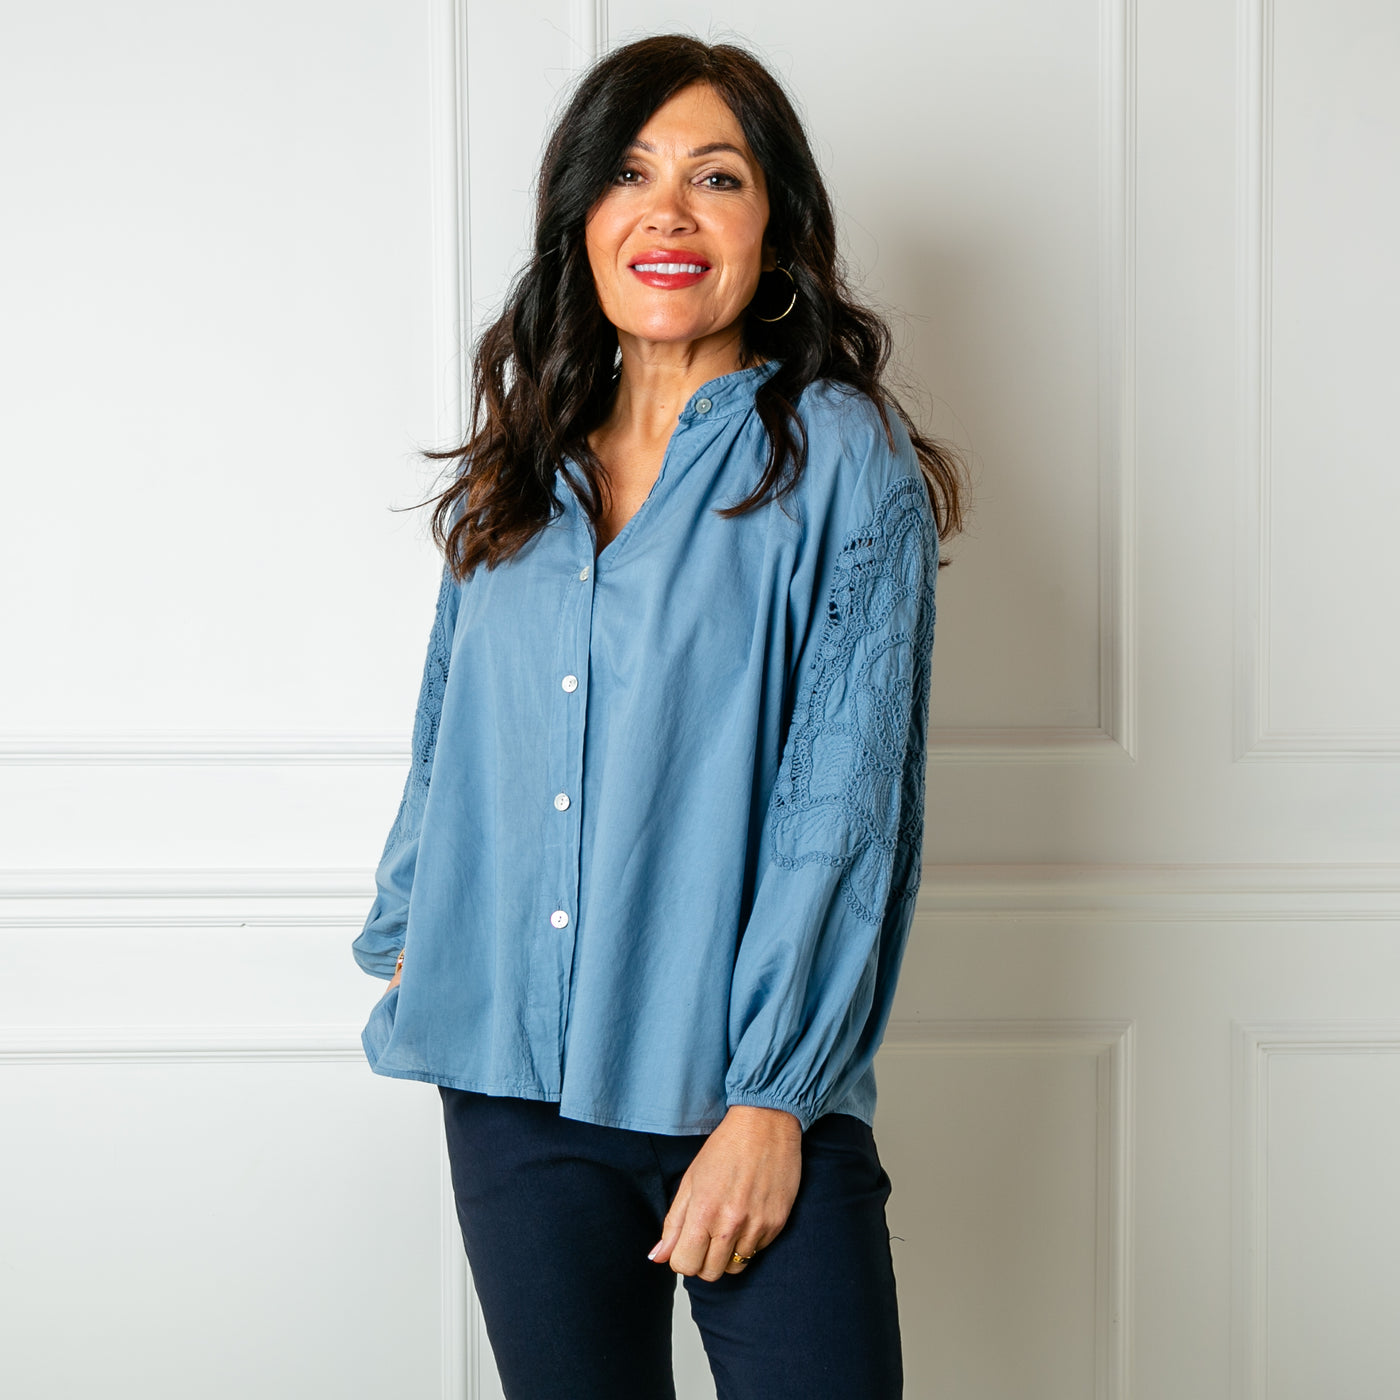 The denim blue Balloon Sleeve Shirt with a collarless V neckline and buttons down the front